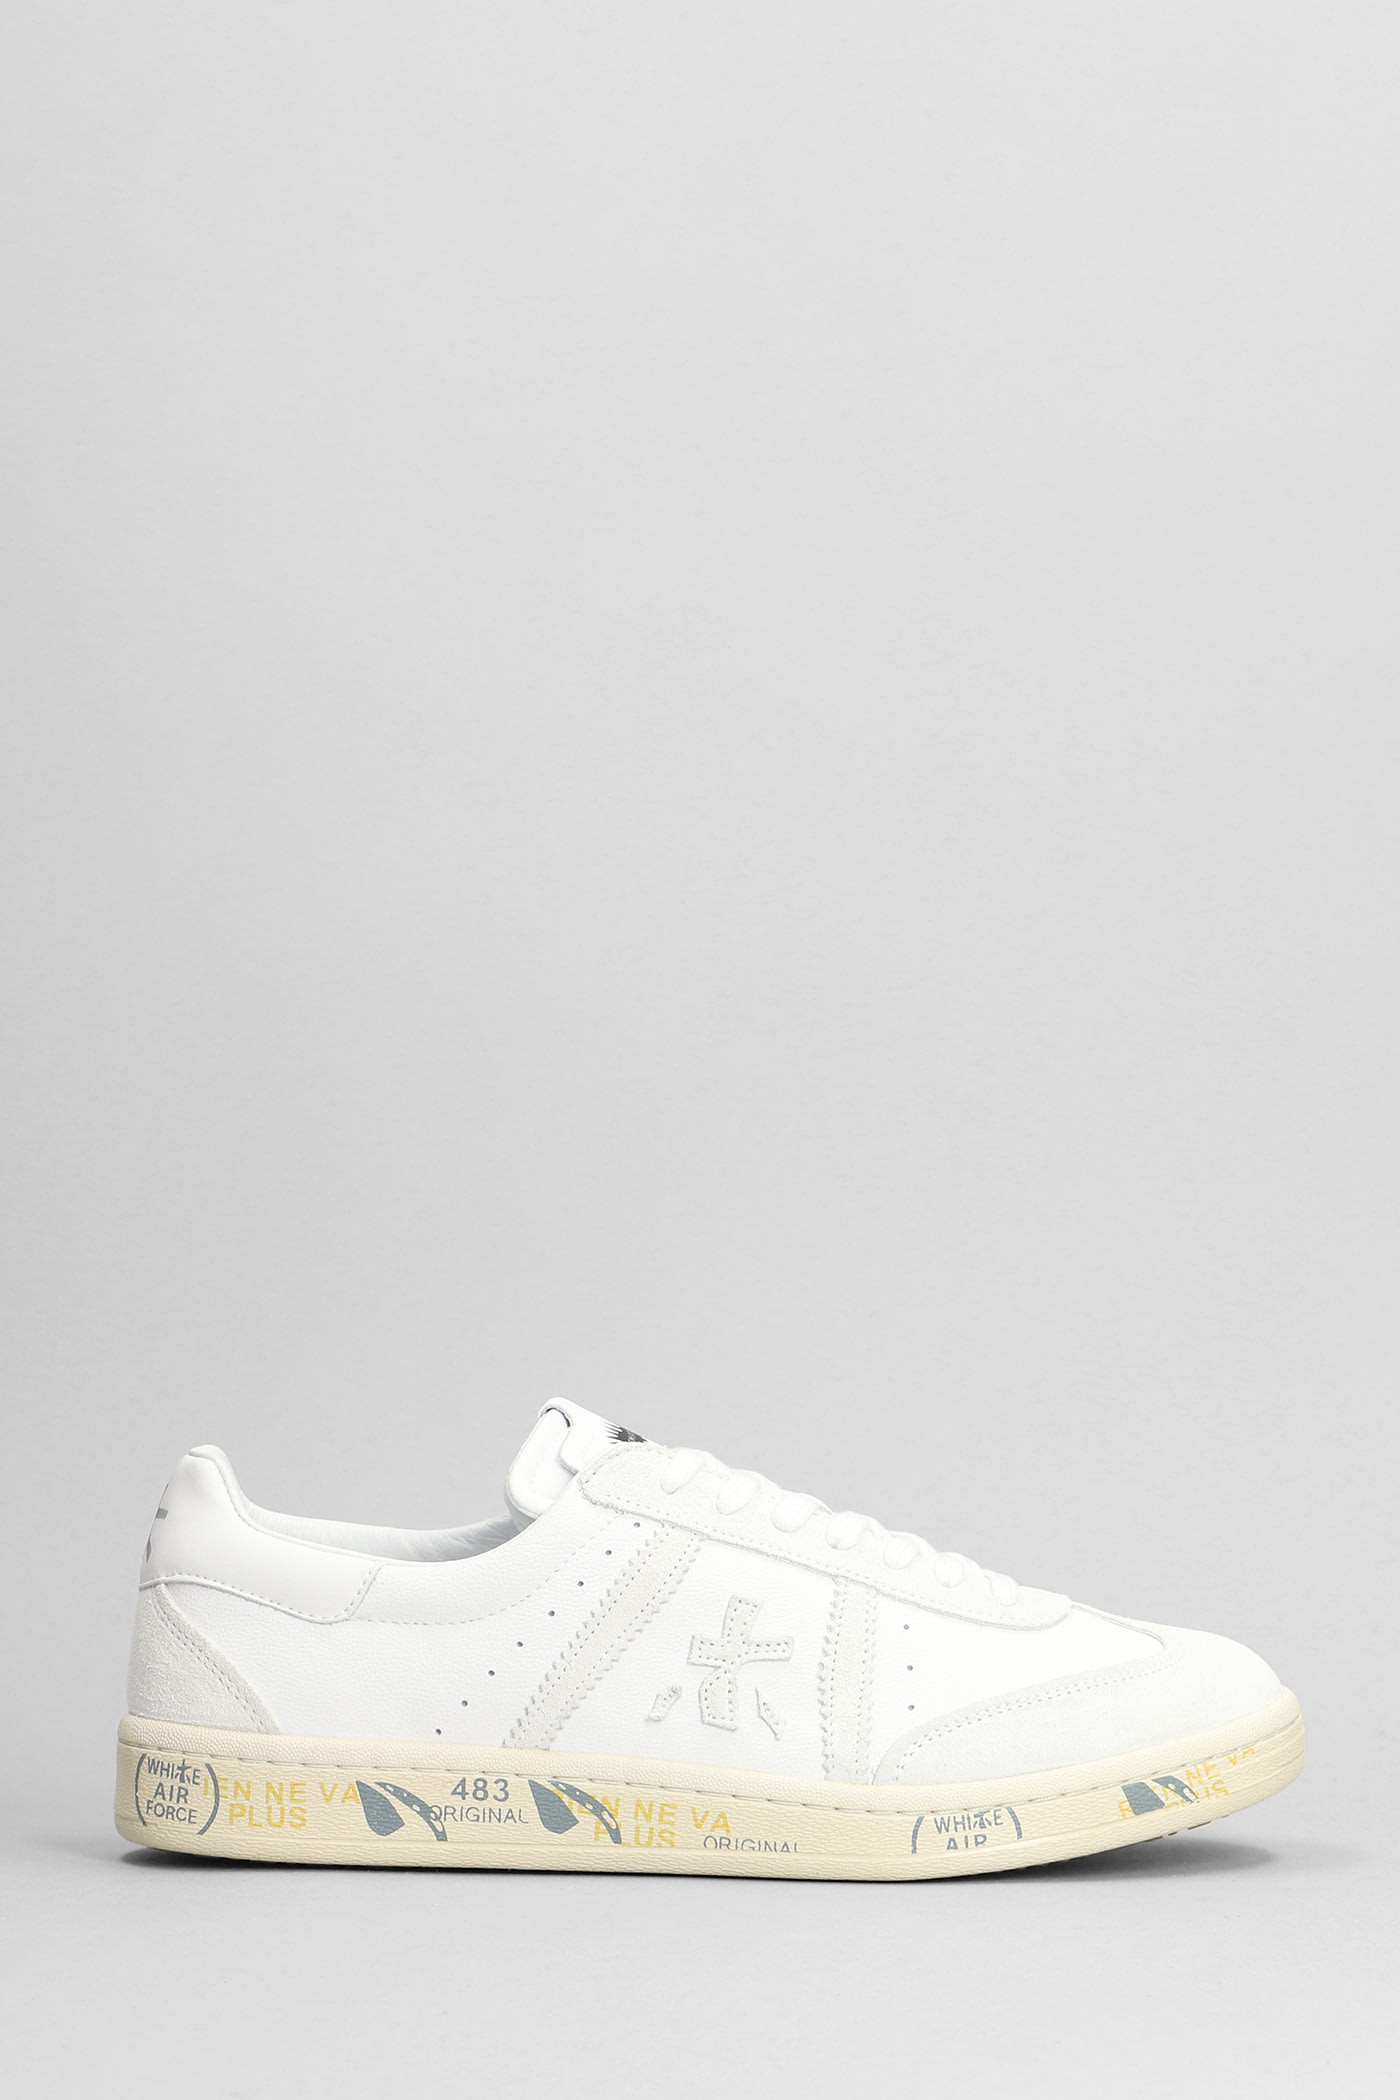 Premiata Bonnie Sneakers In White Suede And Leather